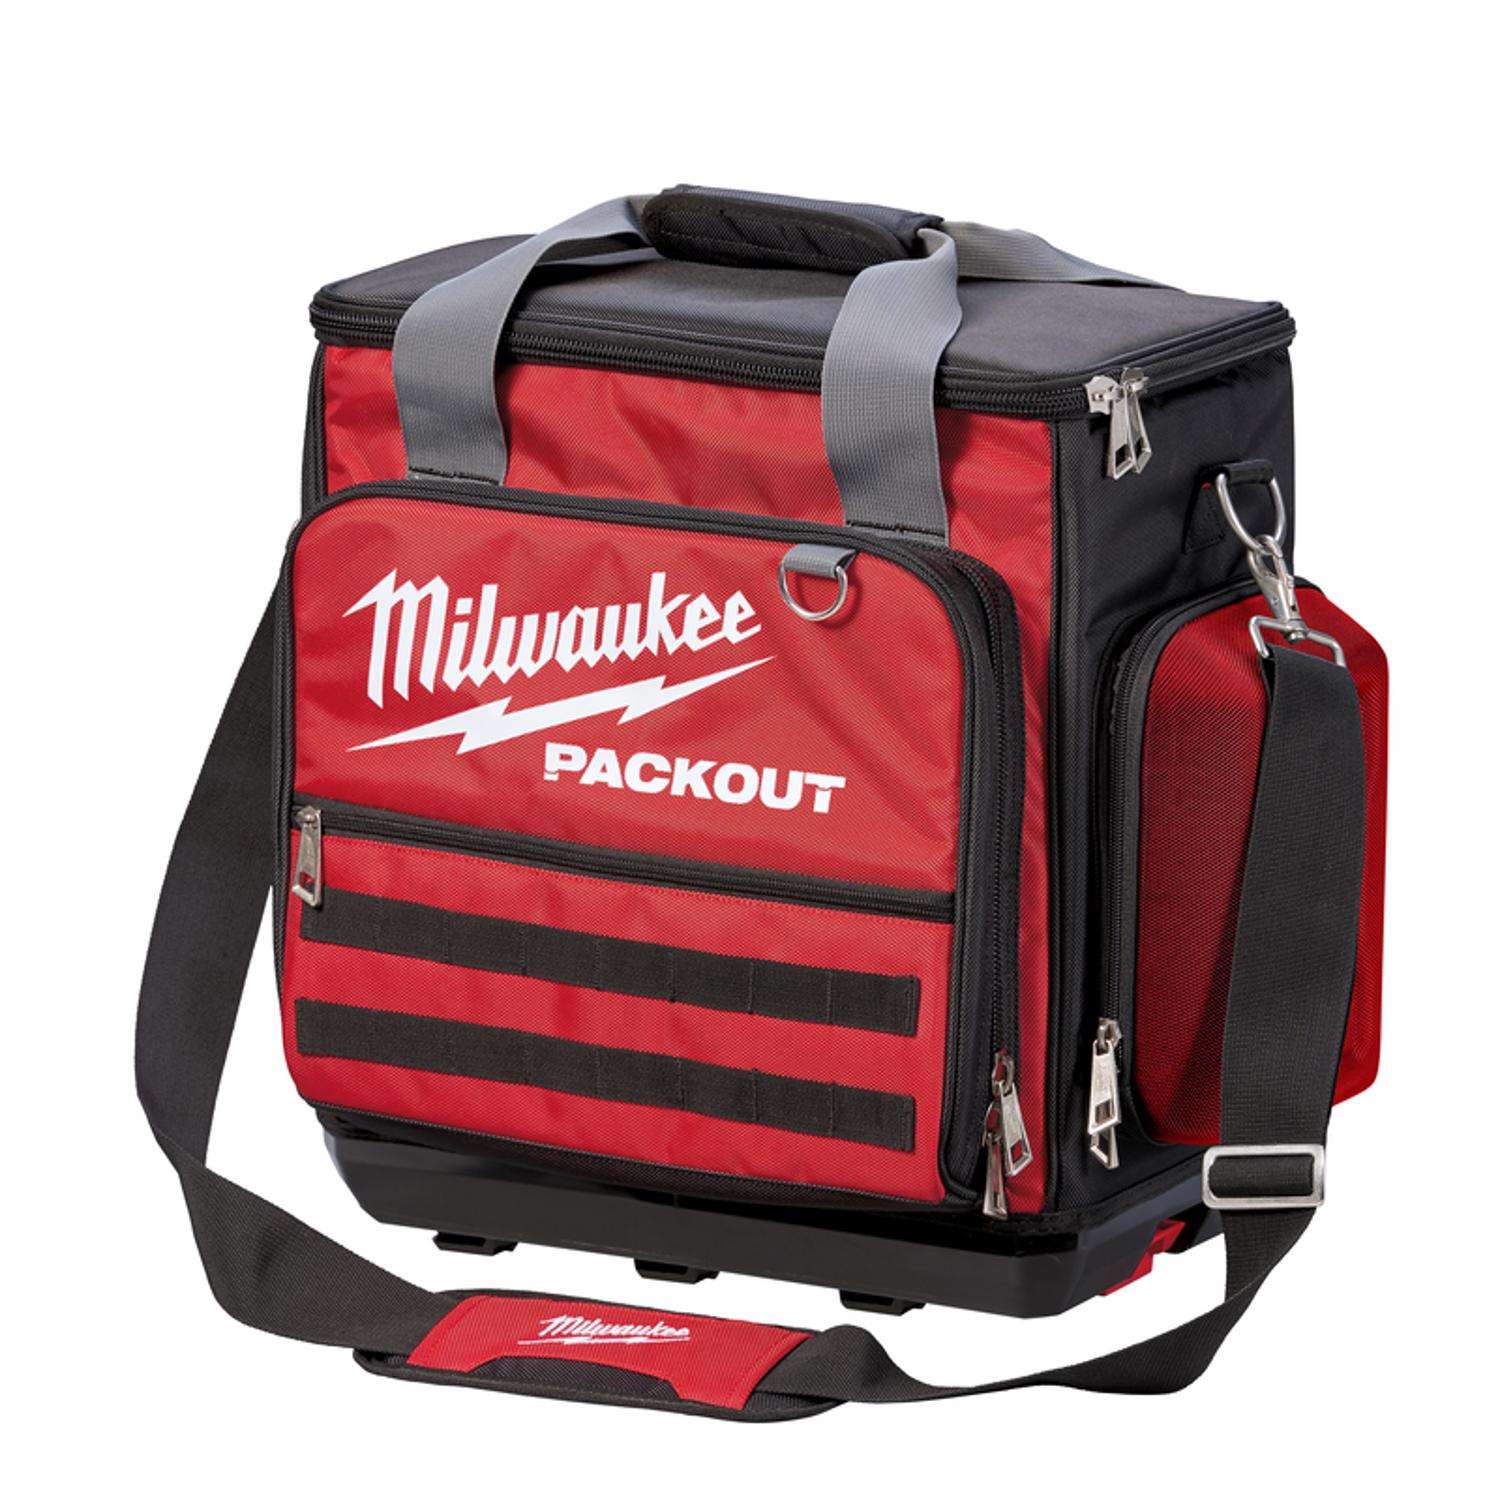 NEW MILWAUKEE 17" X 11" X 10" Large Tool Bag Tote Case With 6 Interior Pockets 